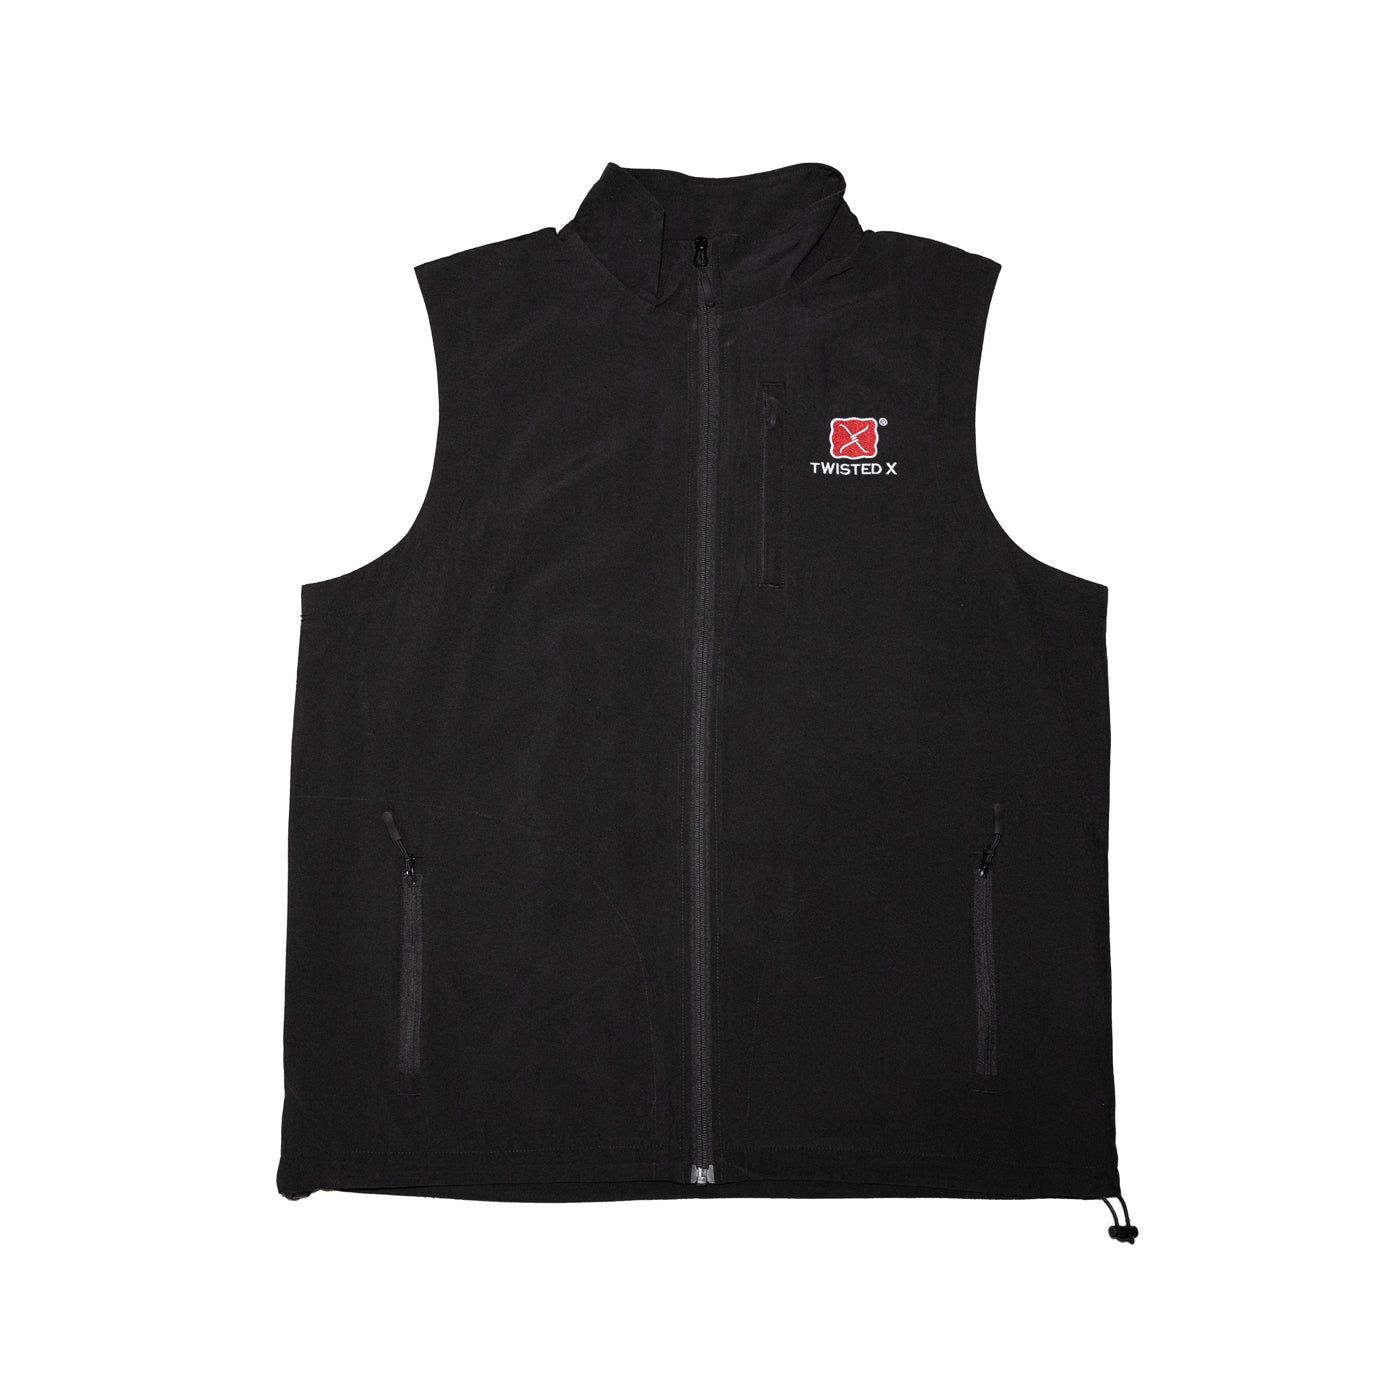 Twisted X Vest